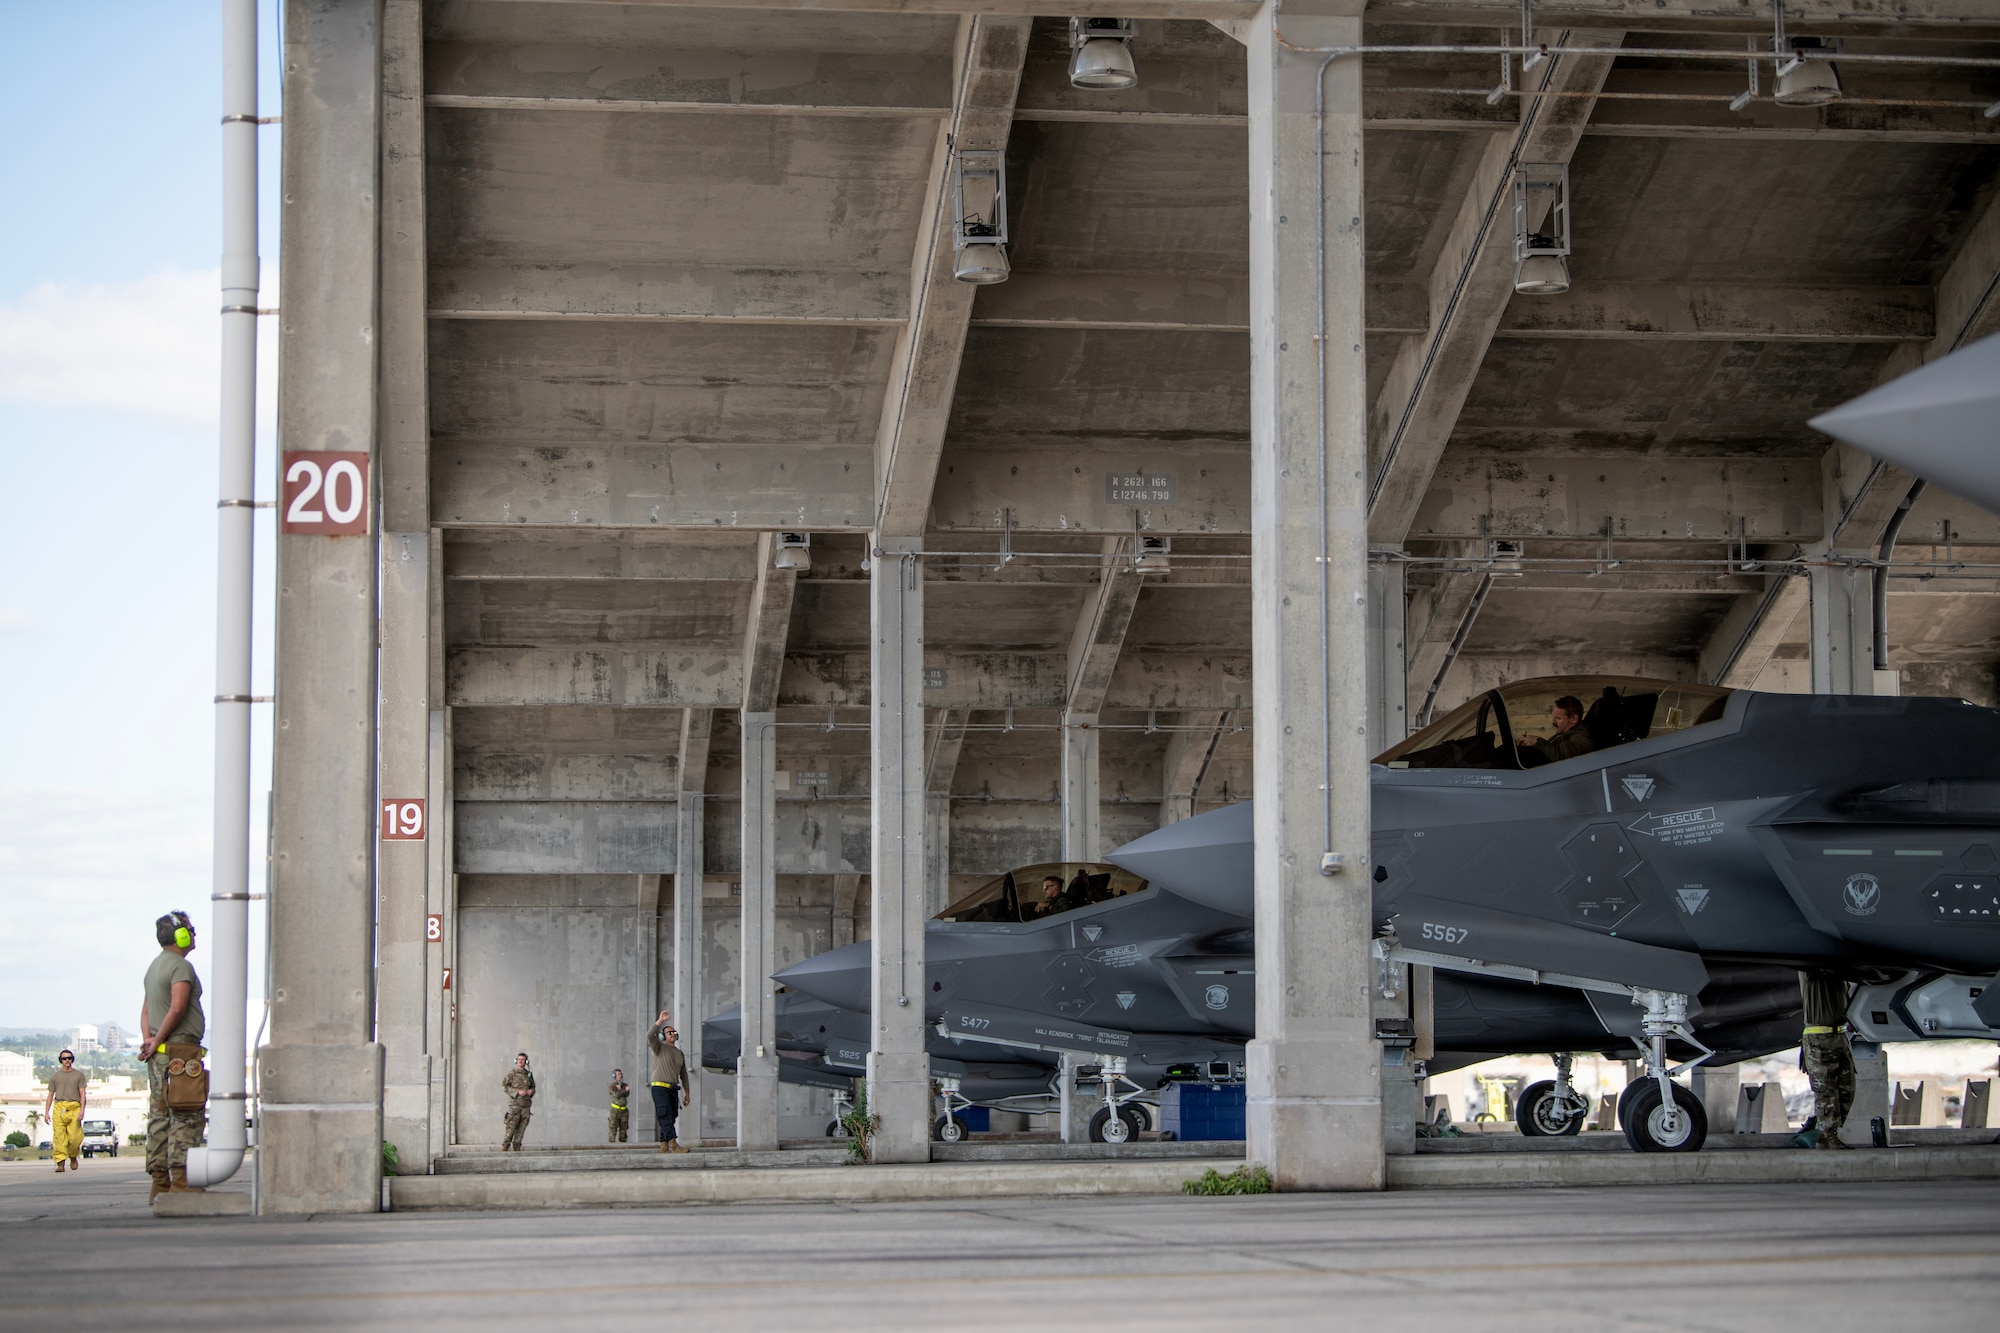 F-35A Lightning II aircraft assigned to the 4th Fighter Squadron, Hill Air Force Base, Utah, arrive at Kadena Air Base, Japan, Nov. 20, 2023. During their deployment to Kadena, the 4th FS will have the opportunity to exchange tactics, techniques and procedures with a variety of flying units and support deterrence measures throughout  the Indo-Pacific theater. (U.S. Air Force photo by Staff Sgt. Jessi Roth)